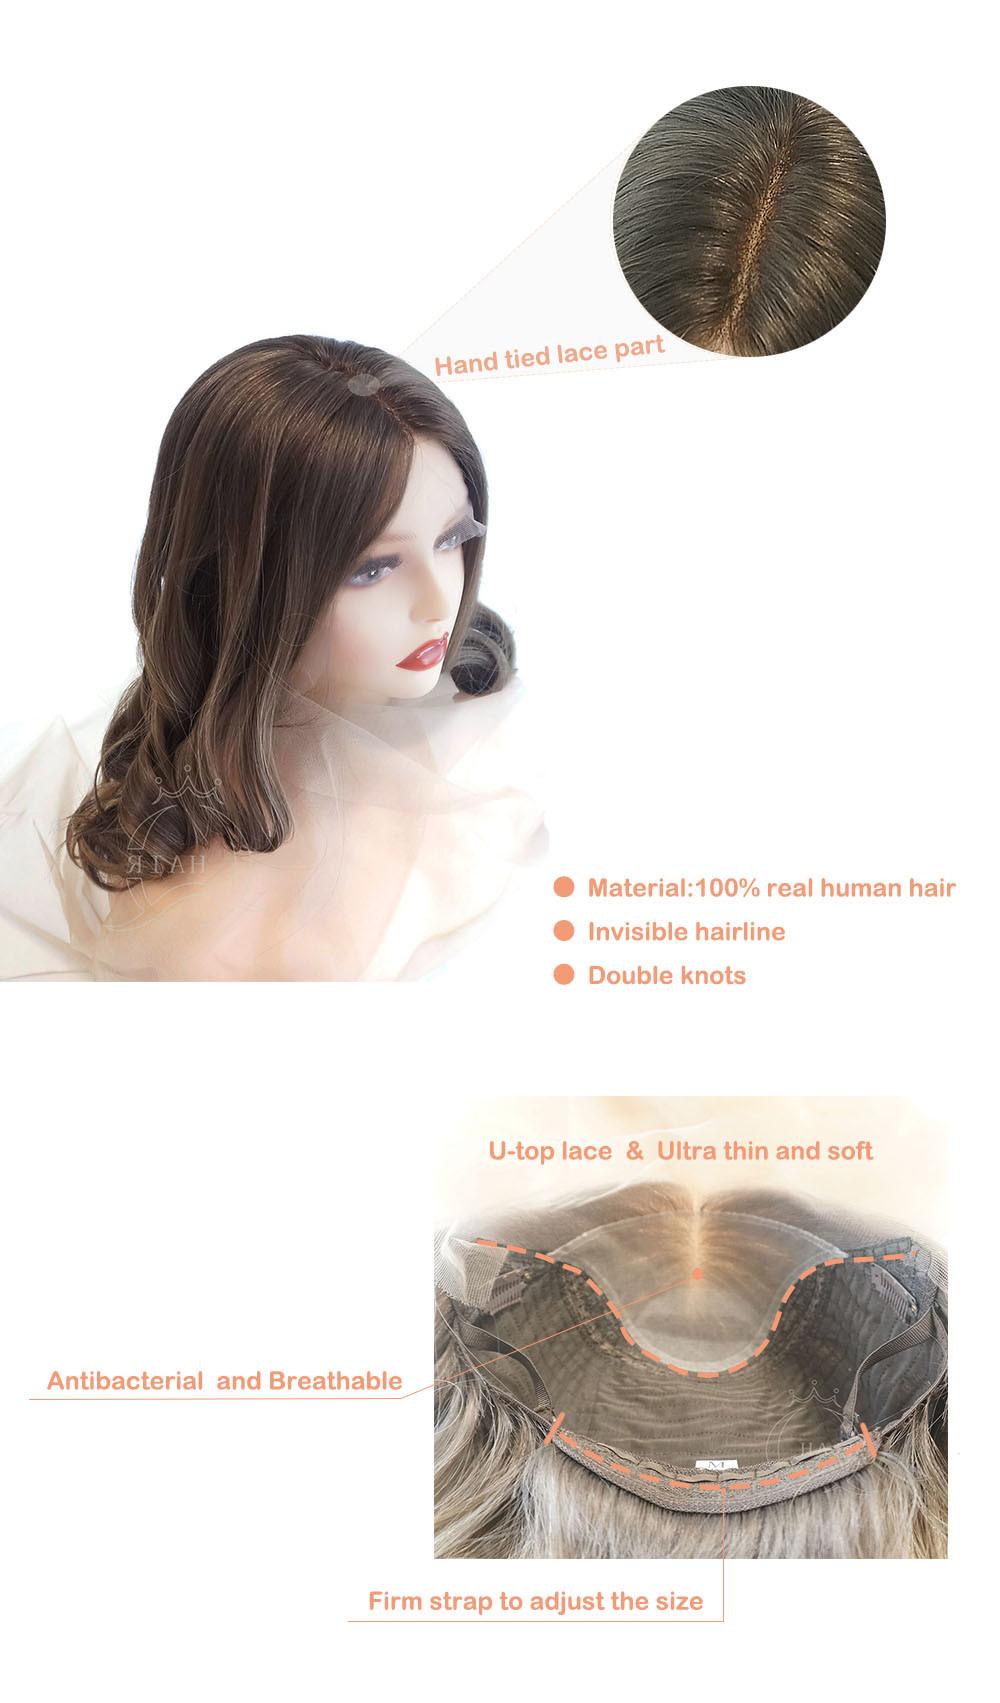 Wholesale Lace Front Wig Hair Braid Cabelo China Factory Cheap Wigs Hair Products Natural Brazilian Virgin Human Hair Wigs Remy Hair Jewish Kosher Wigs Lace Wig